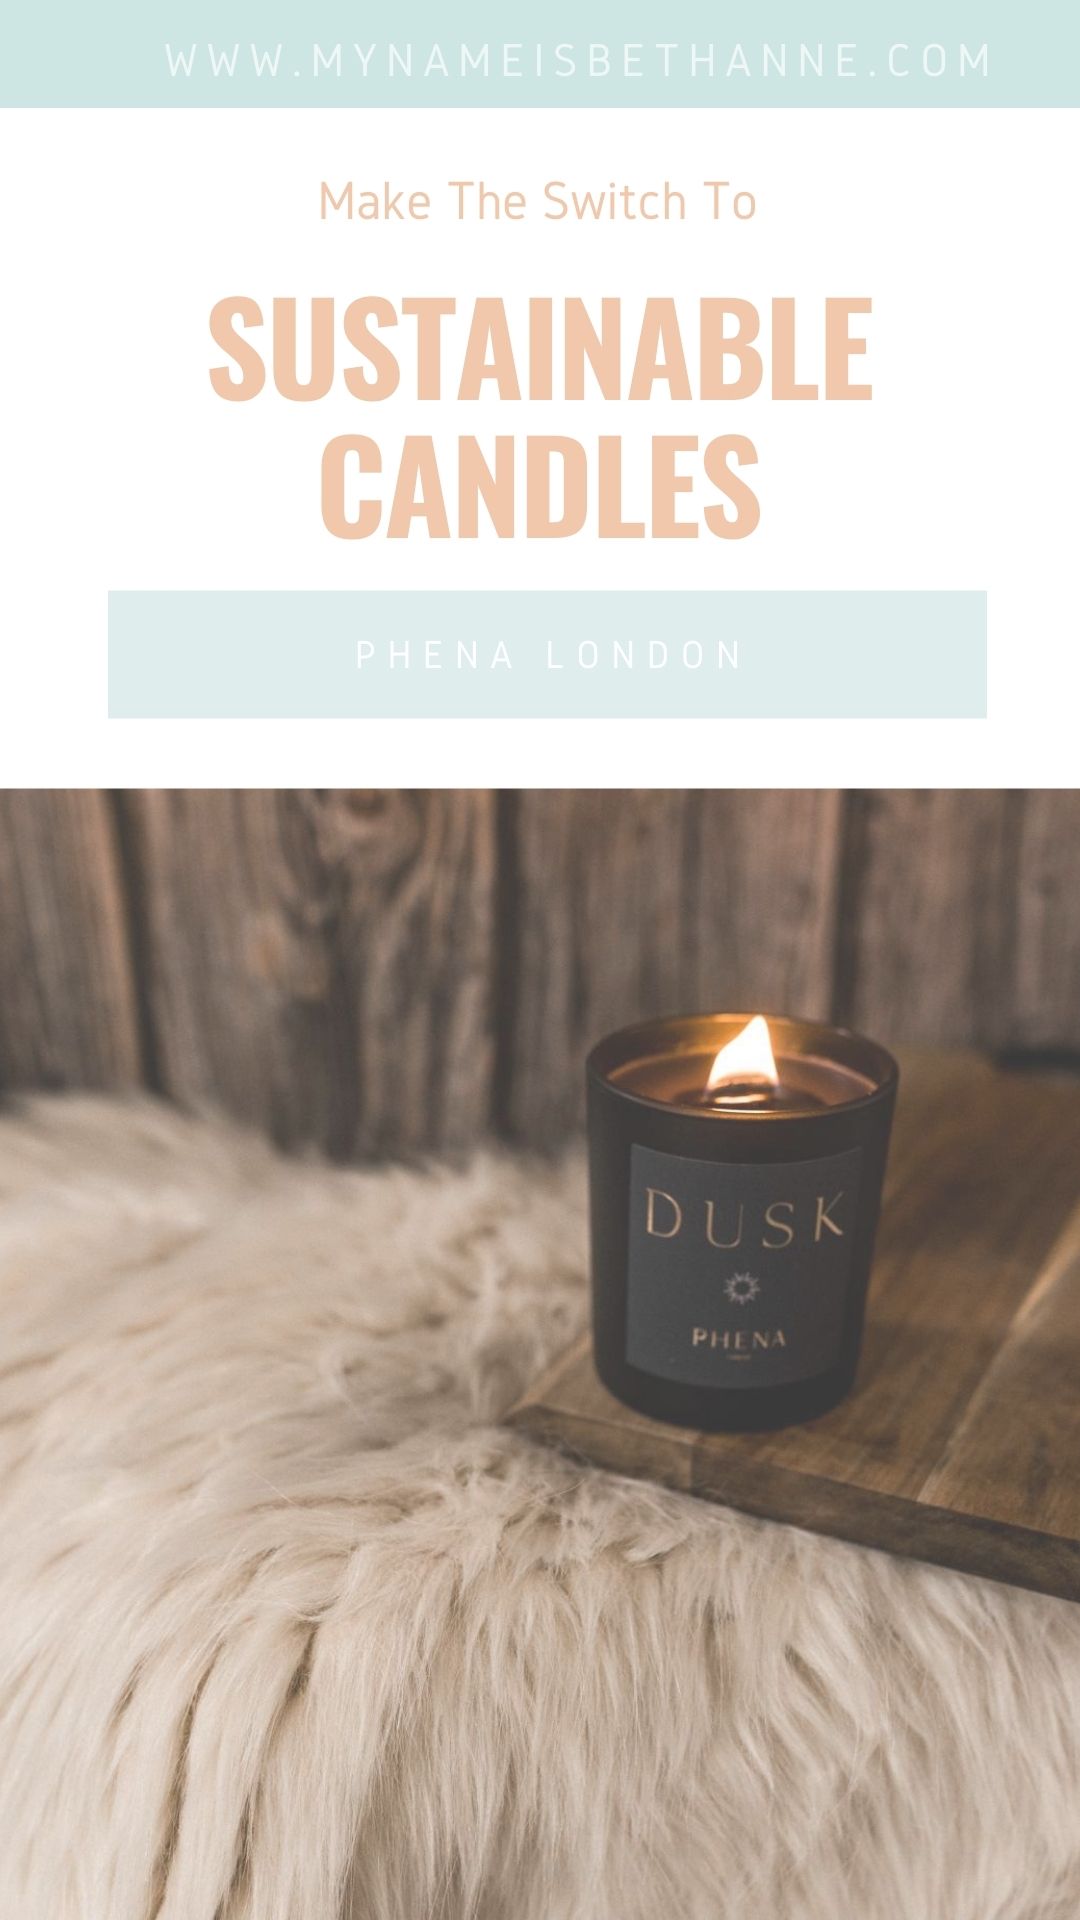 Phena London - Circular Aromatherapy Candles Made From Waste Cooking Oil